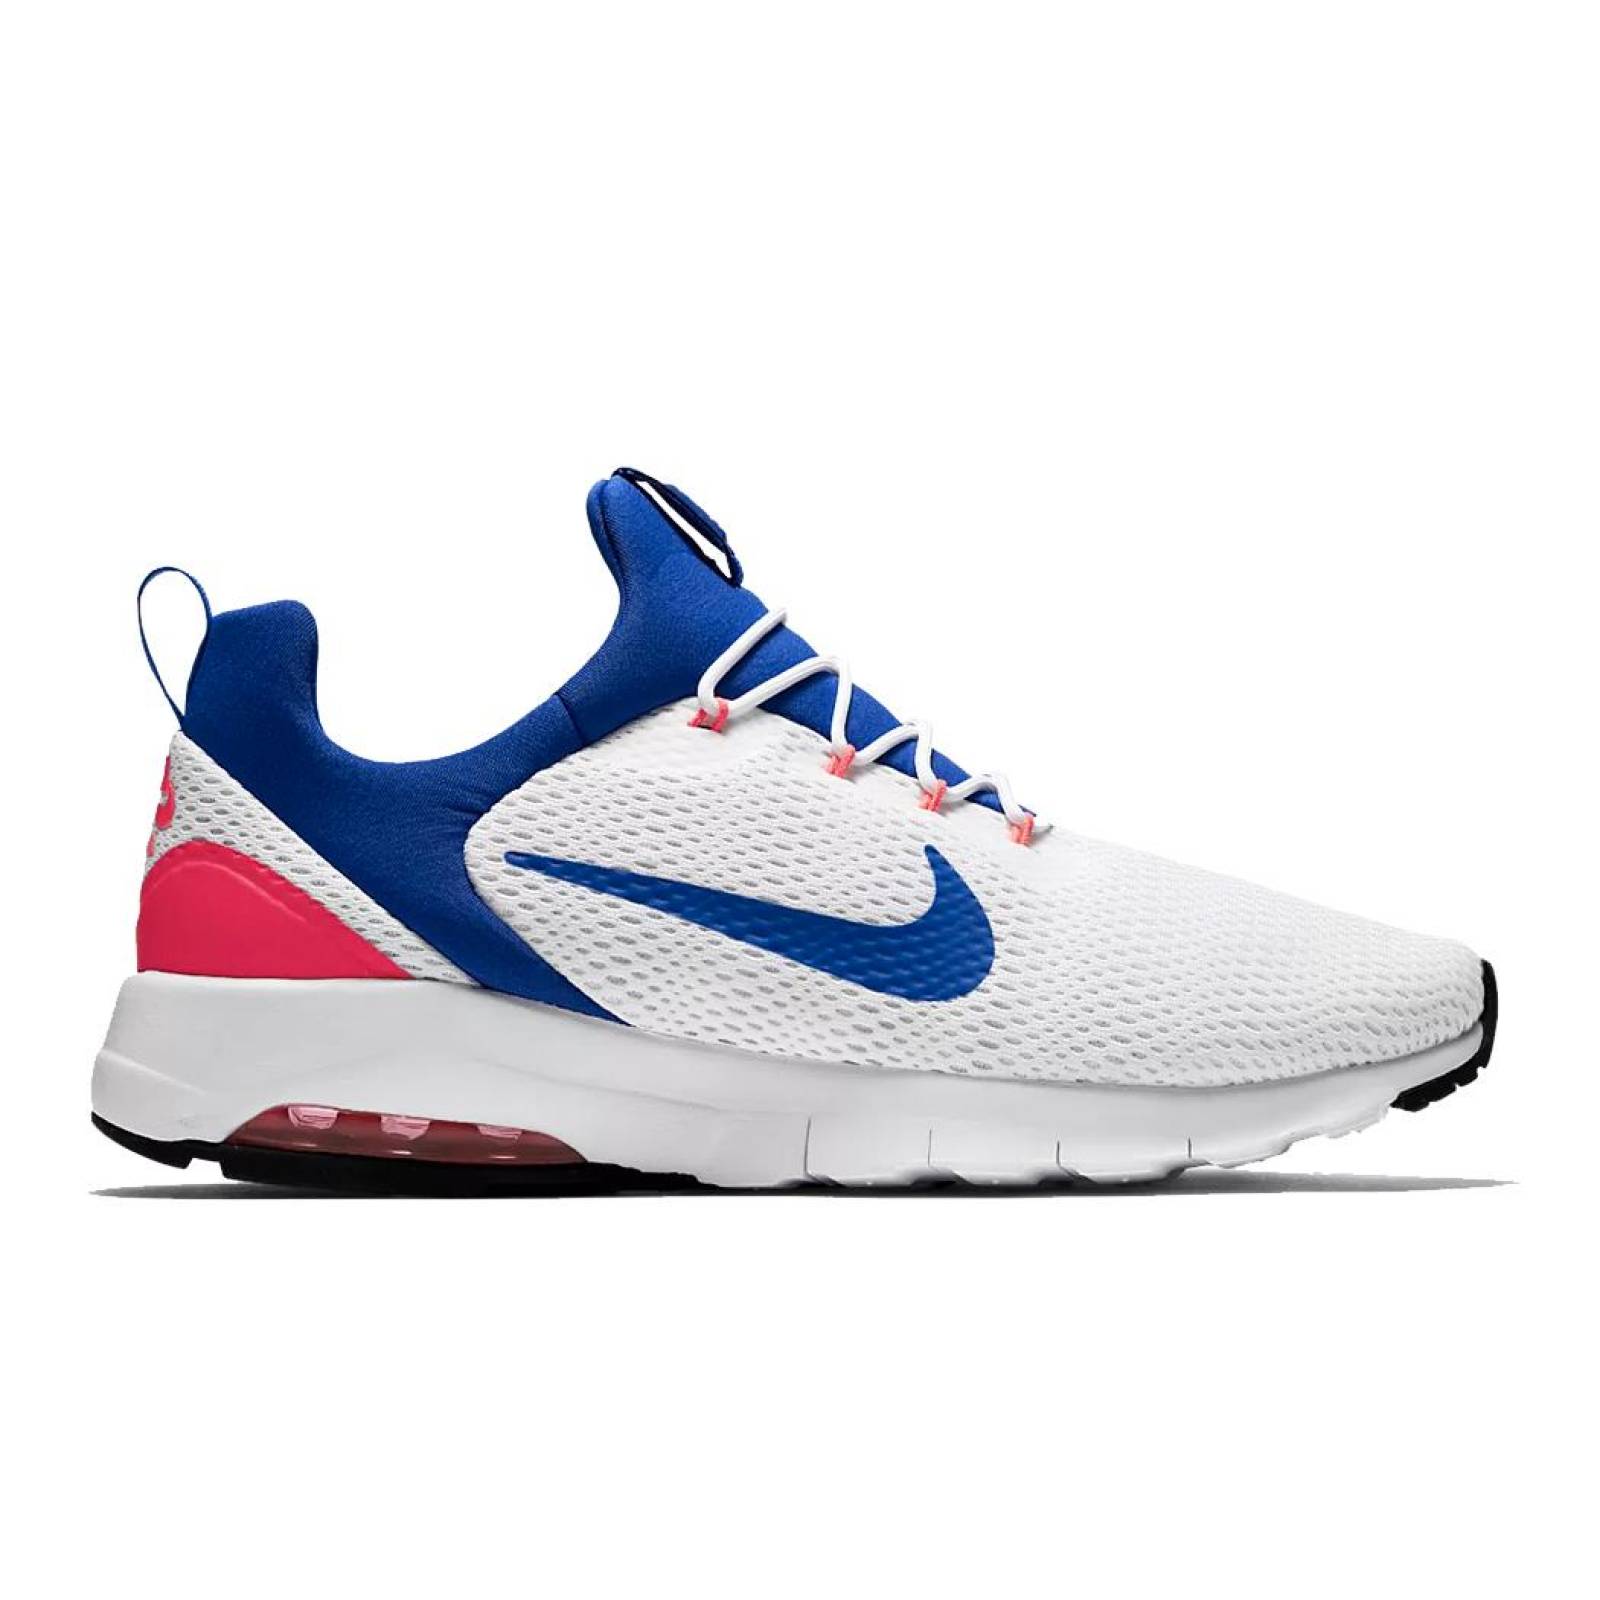 Tenis Nike Air Max Motion Racer Hombre Correr 